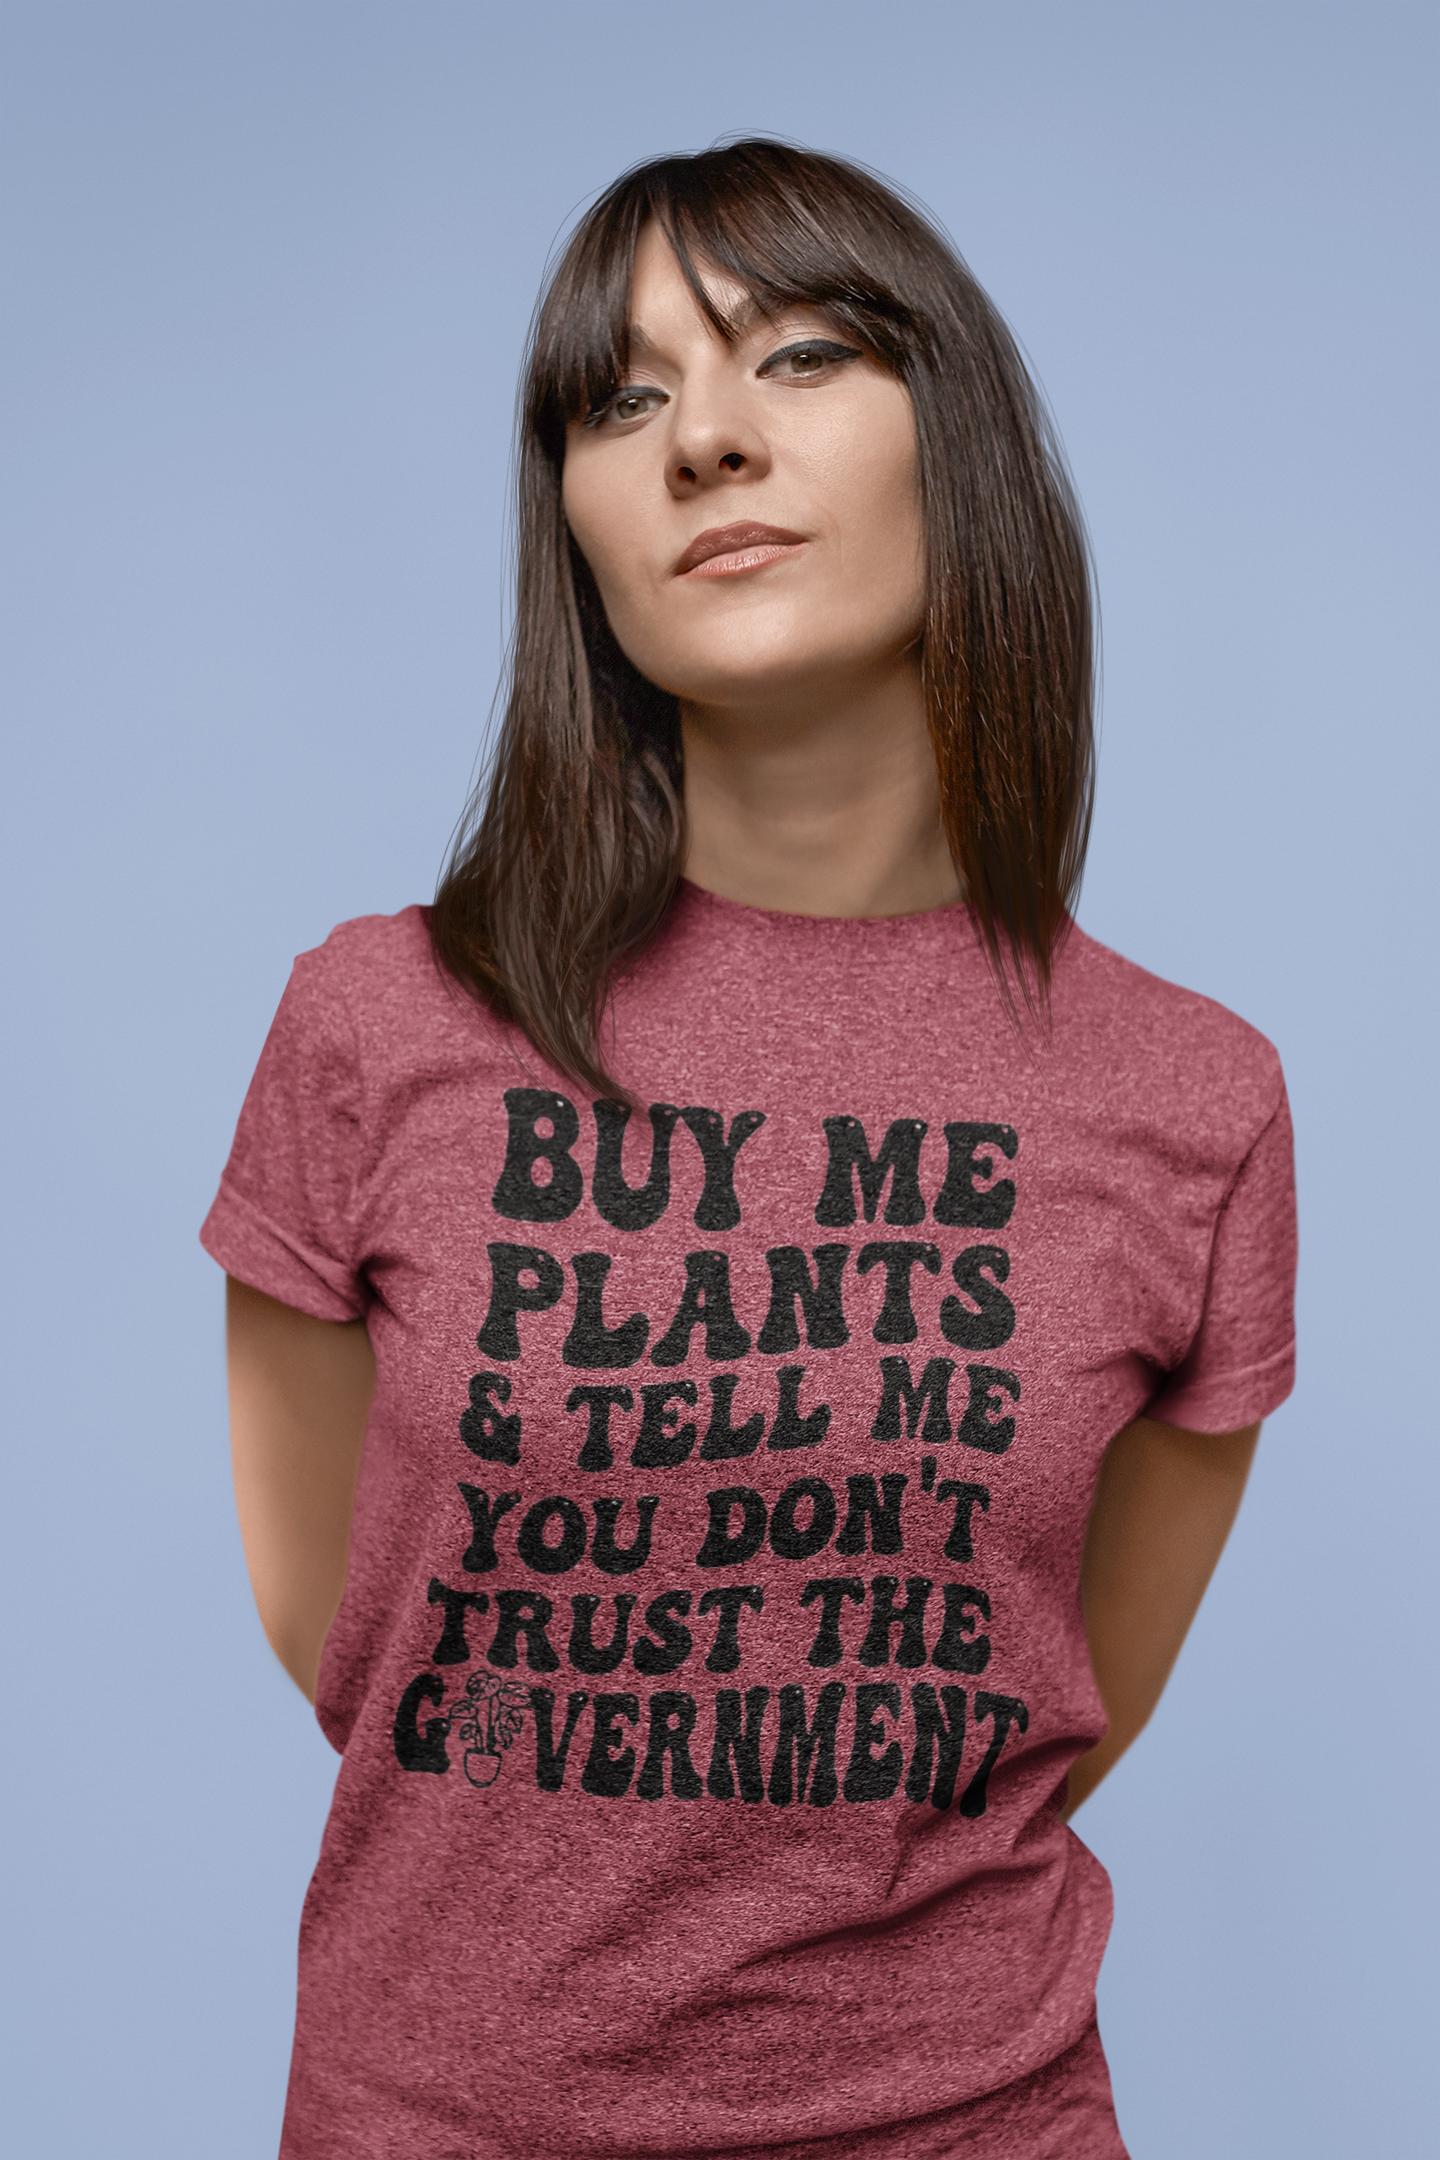 Buy Me Plants And Tell Me You Don't Trust The Government